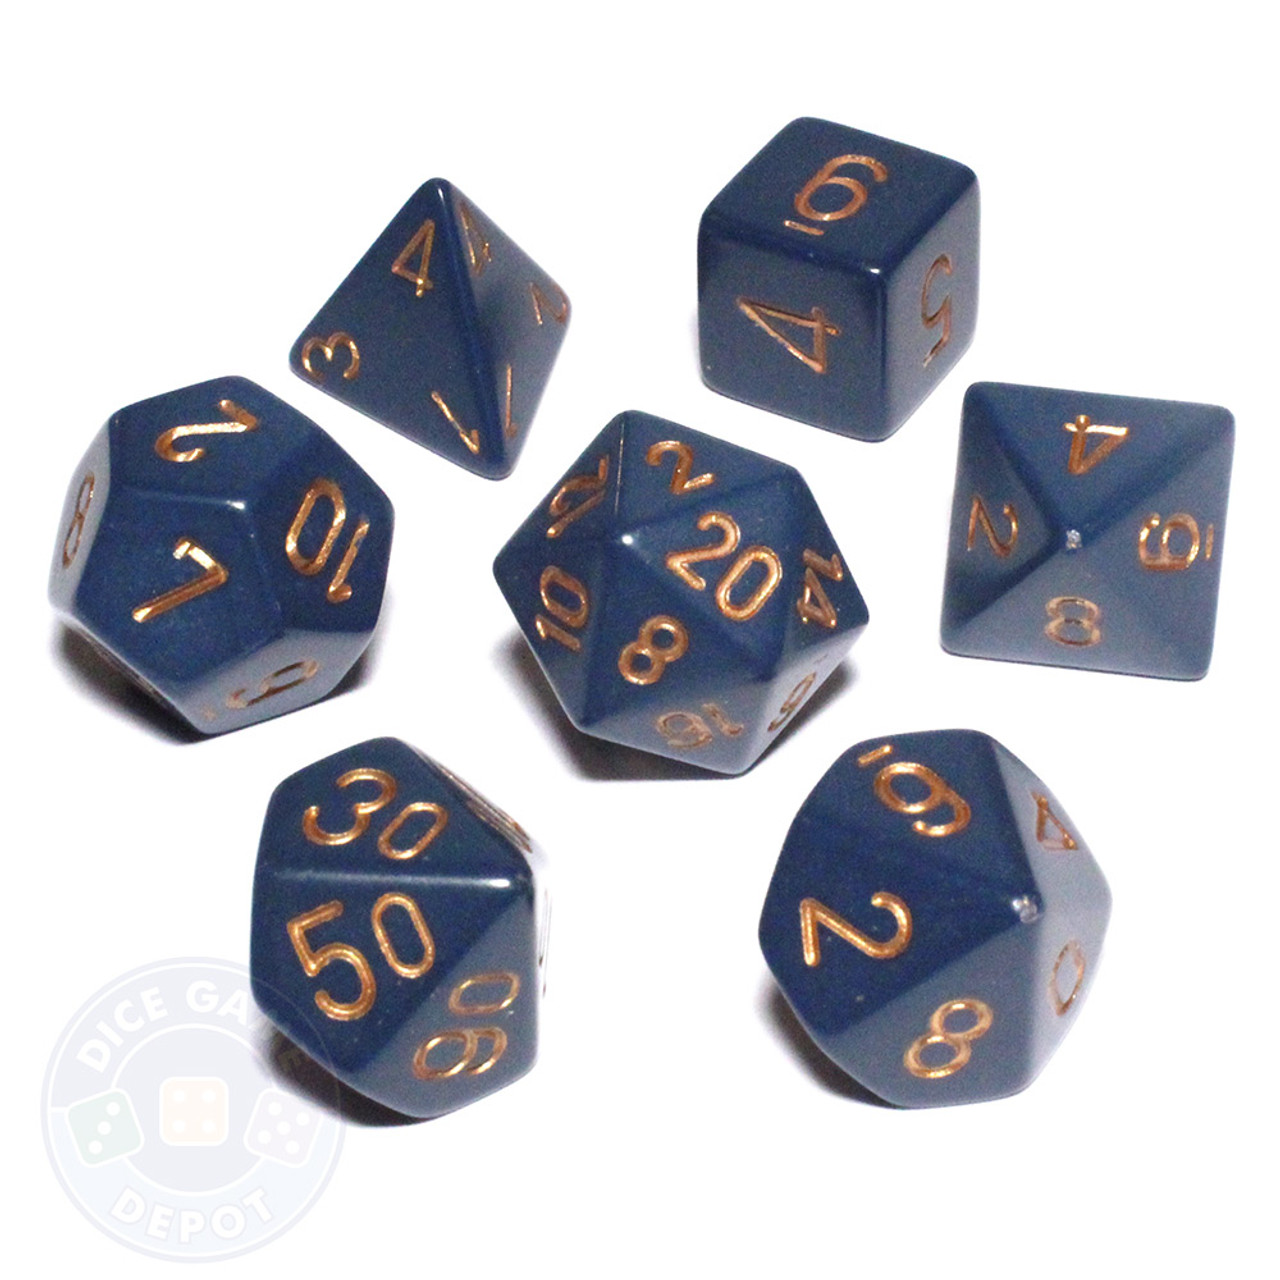 DND Dice Set-Chessex D&D Dice-16mm Opaque Blue and White Plastic Polyhedral Dice Set-Dungeons and Dragons Dice Includes 7 Dice D4 D6 D8 D10 D12 D20 D% 